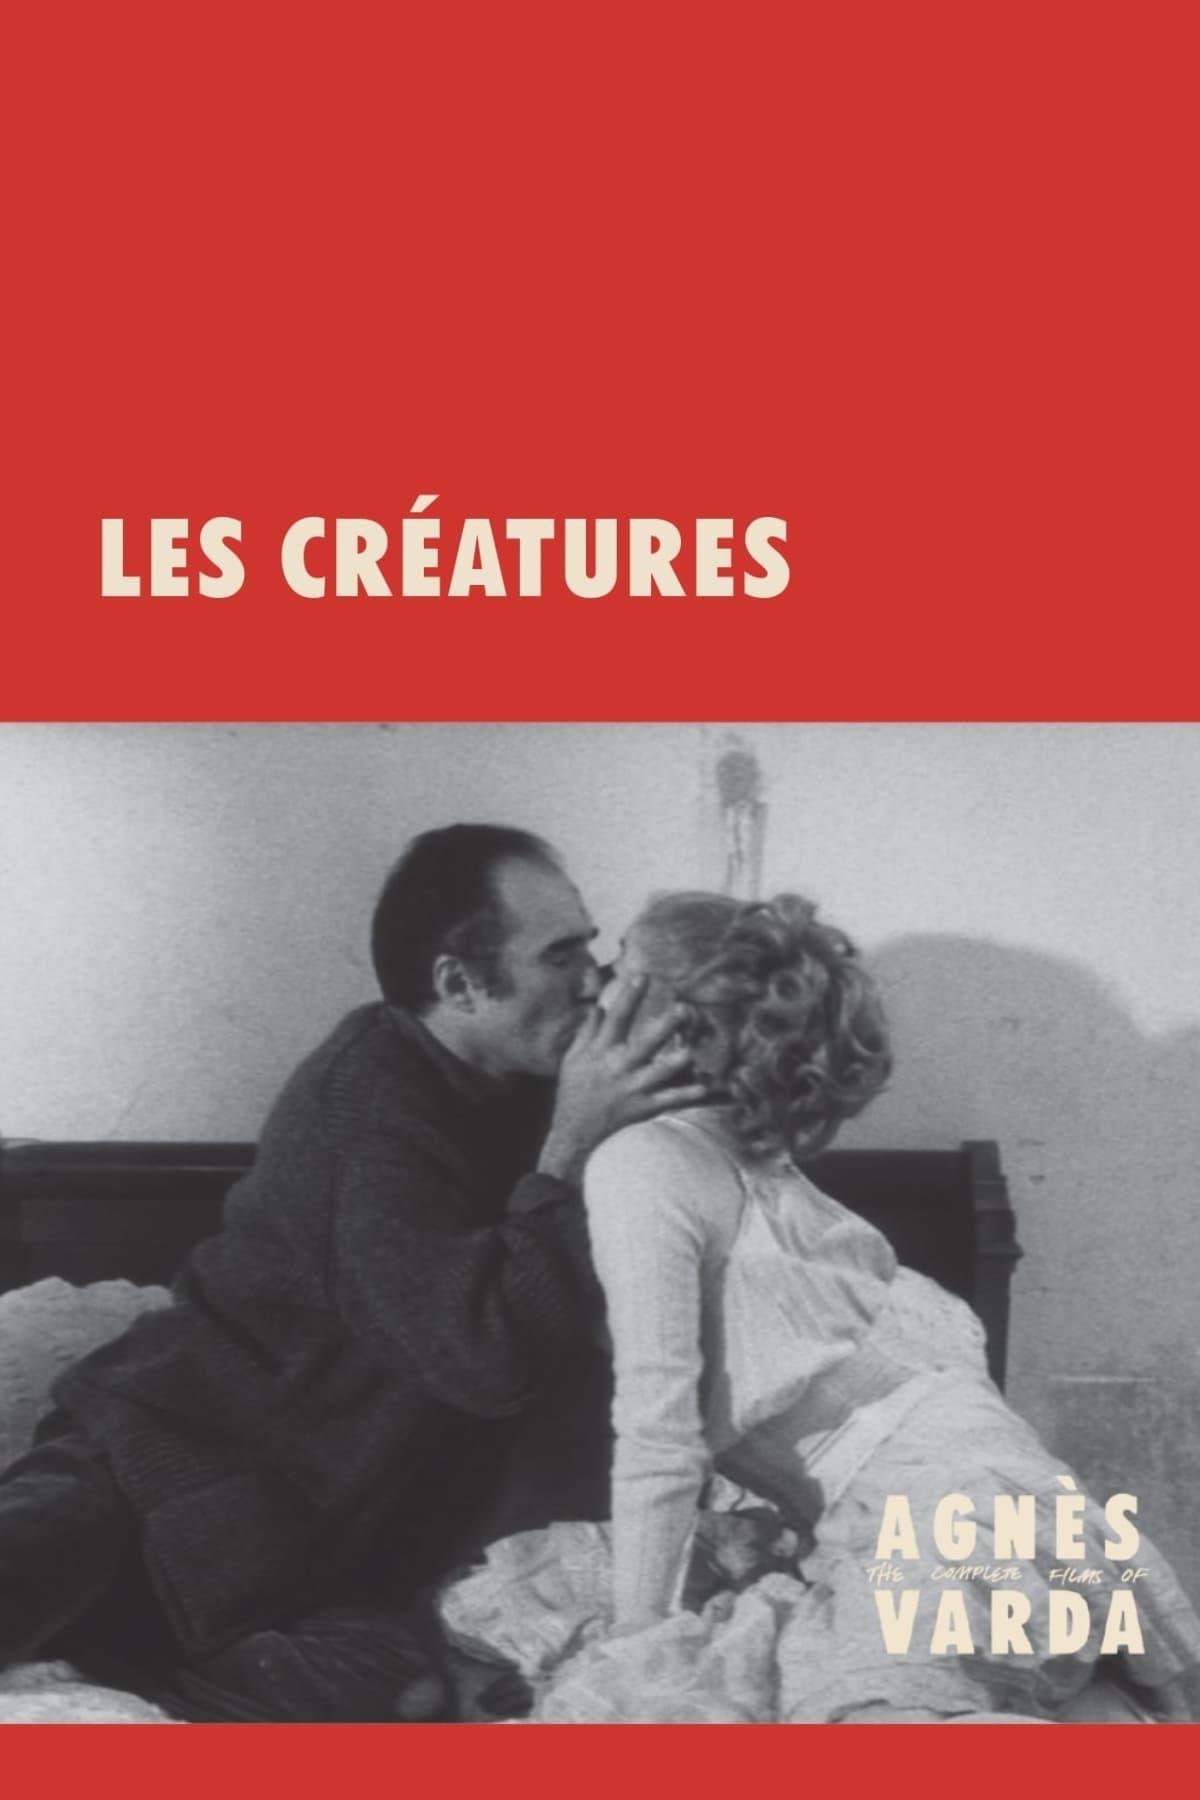 The Creatures poster